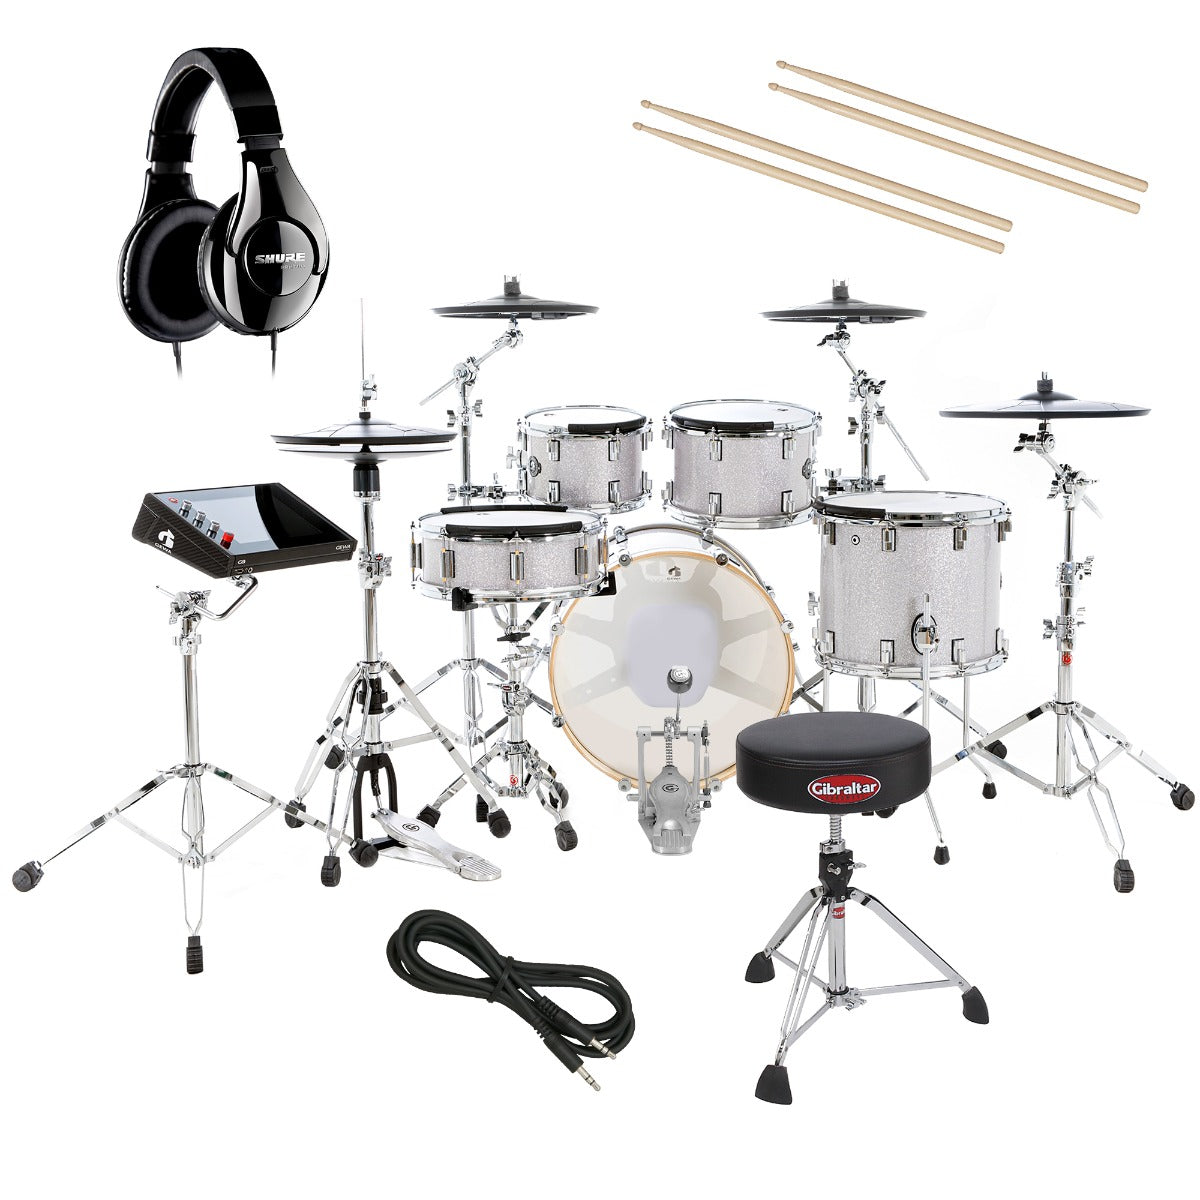 Collage of the GEWA G9 Pro 5 SE Electronic Drum Set - Silver Sparkle DRUM ESSENTIALS BUNDLE showing included components